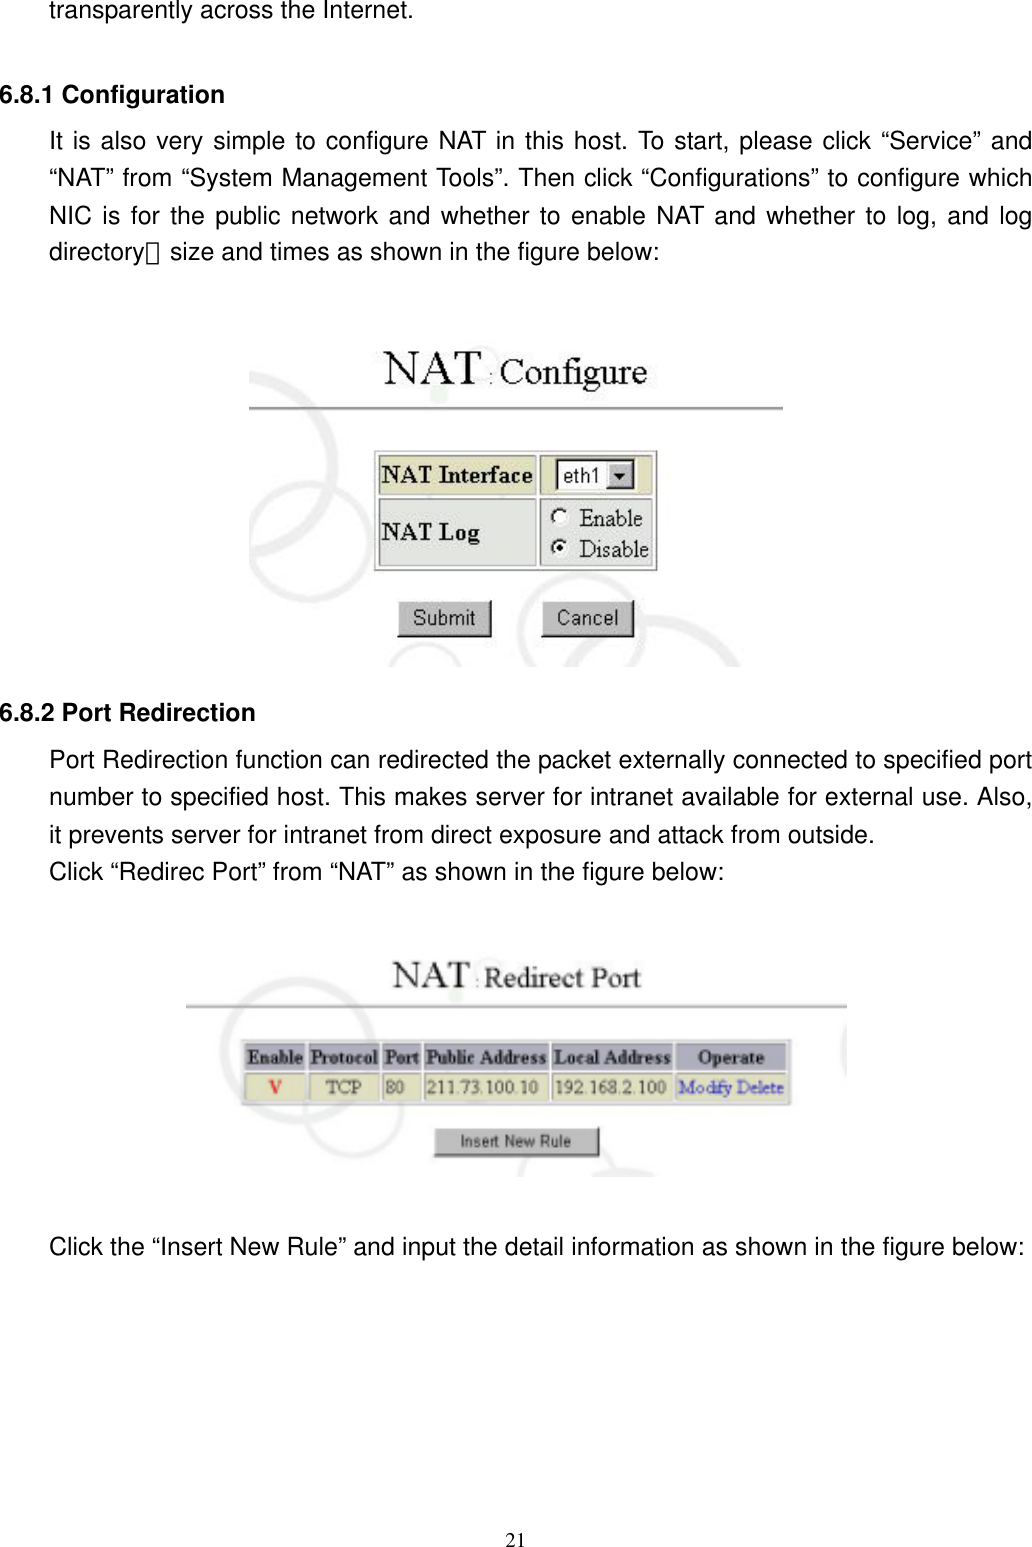  21transparently across the Internet.  6.8.1 Configuration It is also very simple to configure NAT in this host. To start, please click “Service” and “NAT” from “System Management Tools”. Then click “Configurations” to configure which NIC is for the public network and whether to enable NAT and whether to log, and log directory、size and times as shown in the figure below:     6.8.2 Port Redirection Port Redirection function can redirected the packet externally connected to specified port number to specified host. This makes server for intranet available for external use. Also, it prevents server for intranet from direct exposure and attack from outside.   Click “Redirec Port” from “NAT” as shown in the figure below:      Click the “Insert New Rule” and input the detail information as shown in the figure below:  